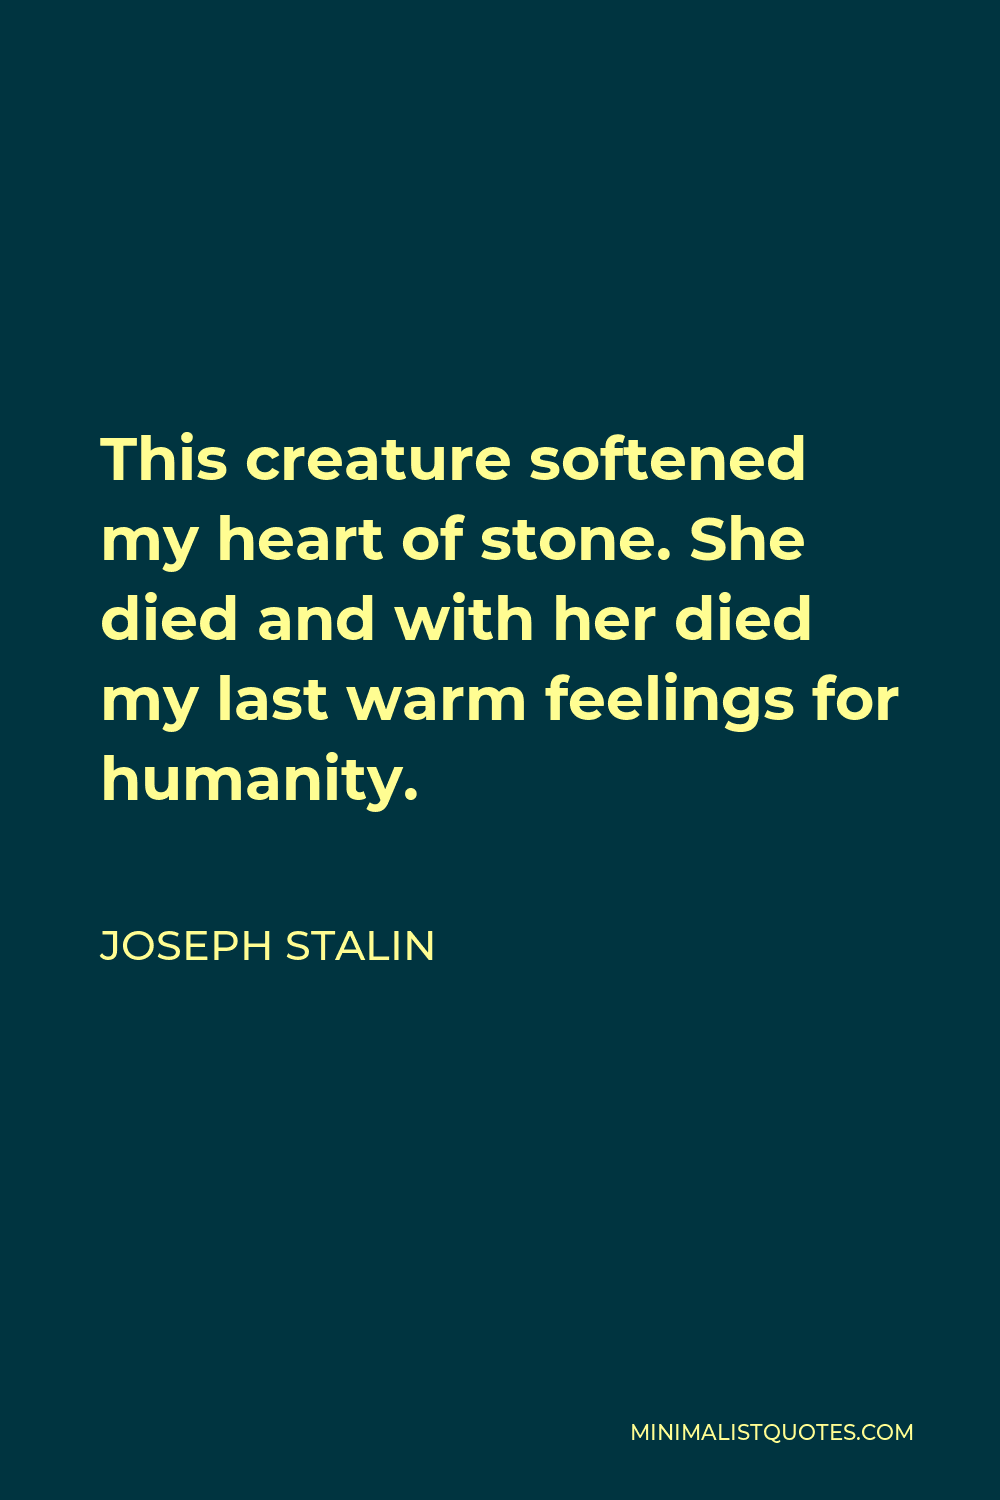 Joseph Stalin Quote - This creature softened my heart of stone. She died and with her died my last warm feelings for humanity.